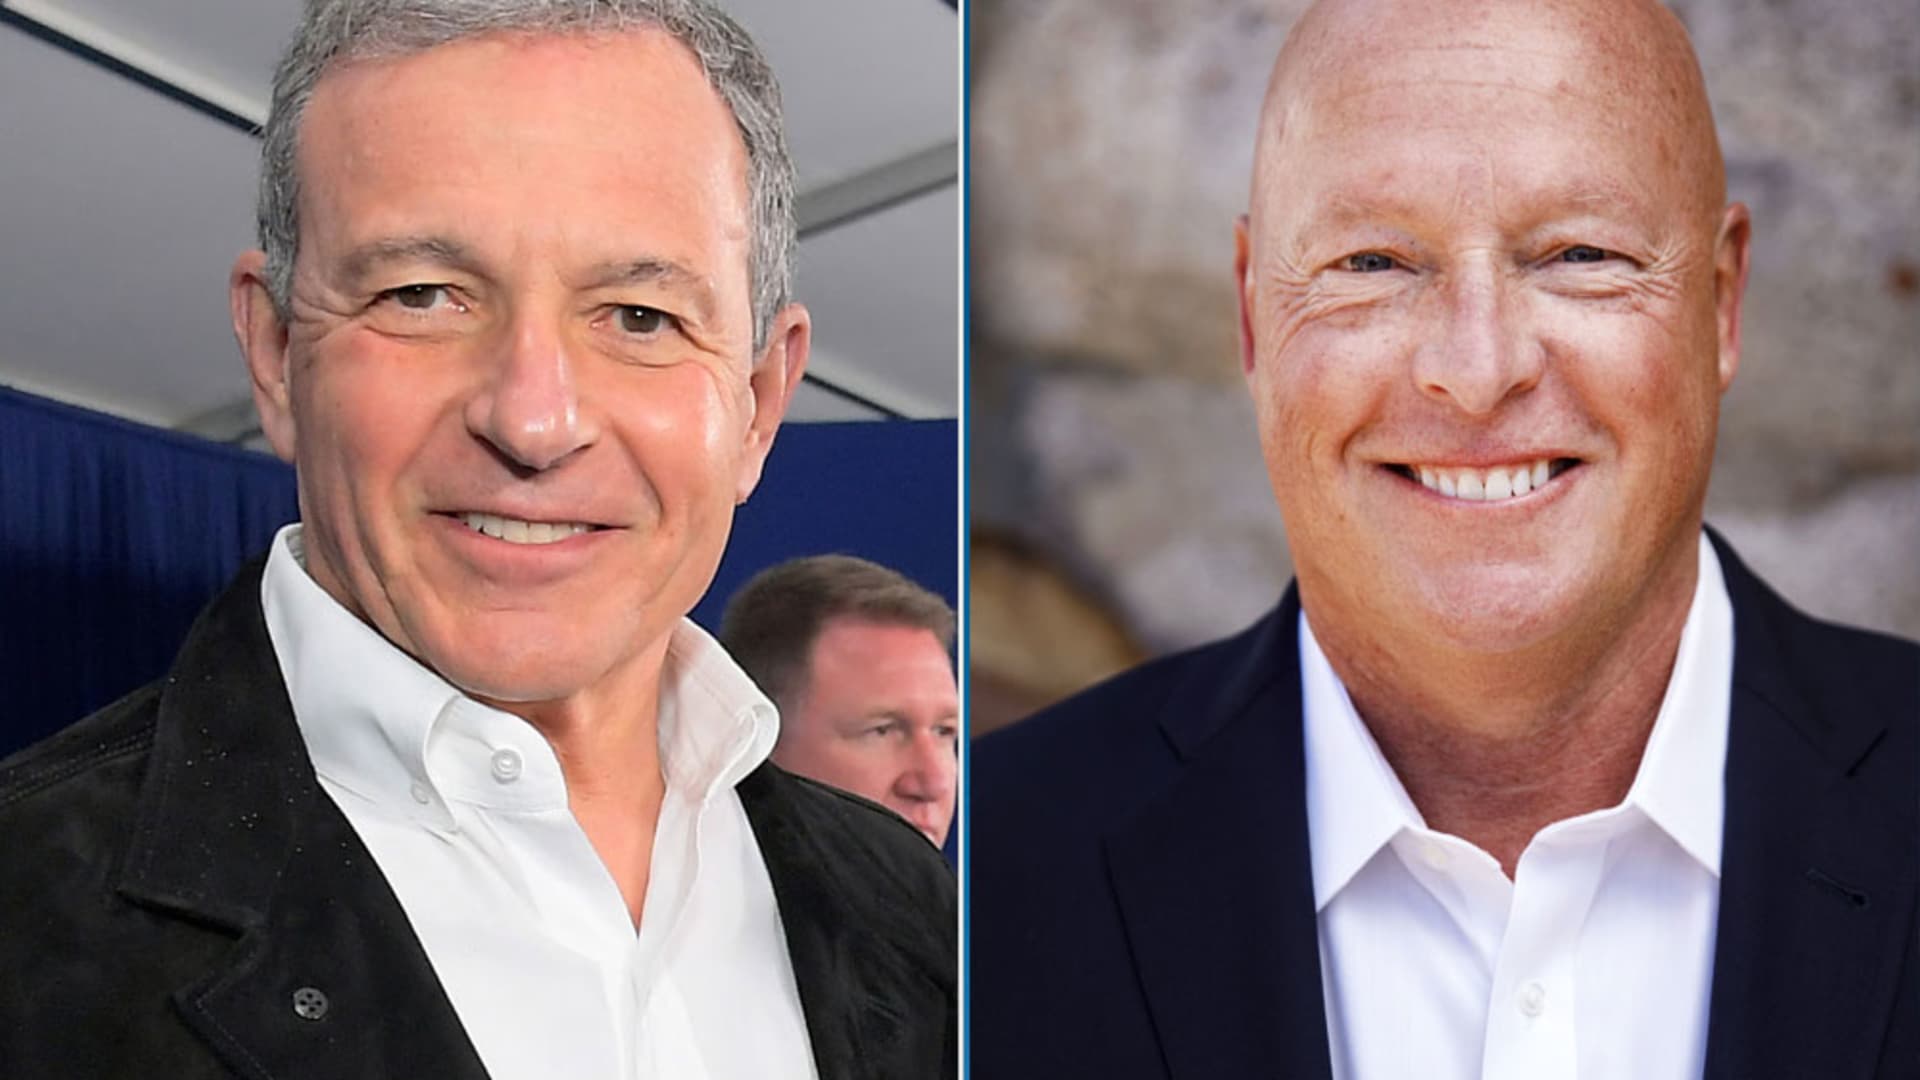 Disney CEO Chapek under pressure, at odds with ex-boss Bob Iger